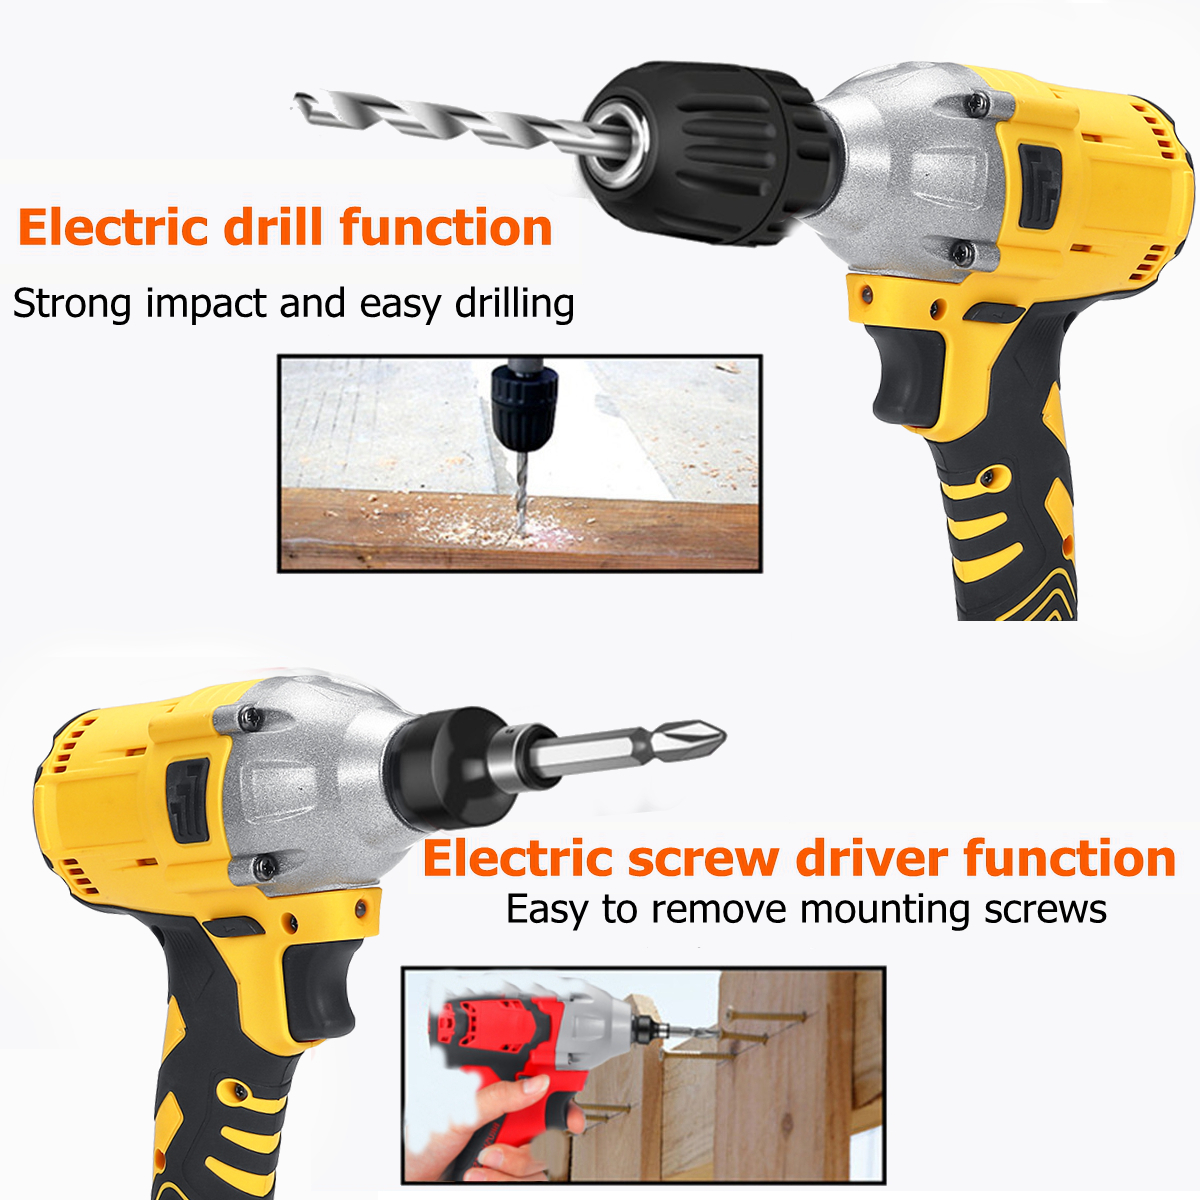 158VF-19800mAh-Cordless-Brushless-Impact-Wrench-Power-Driver-Electric-Wrench-Socket-Battery-Hand-Dri-1545779-2